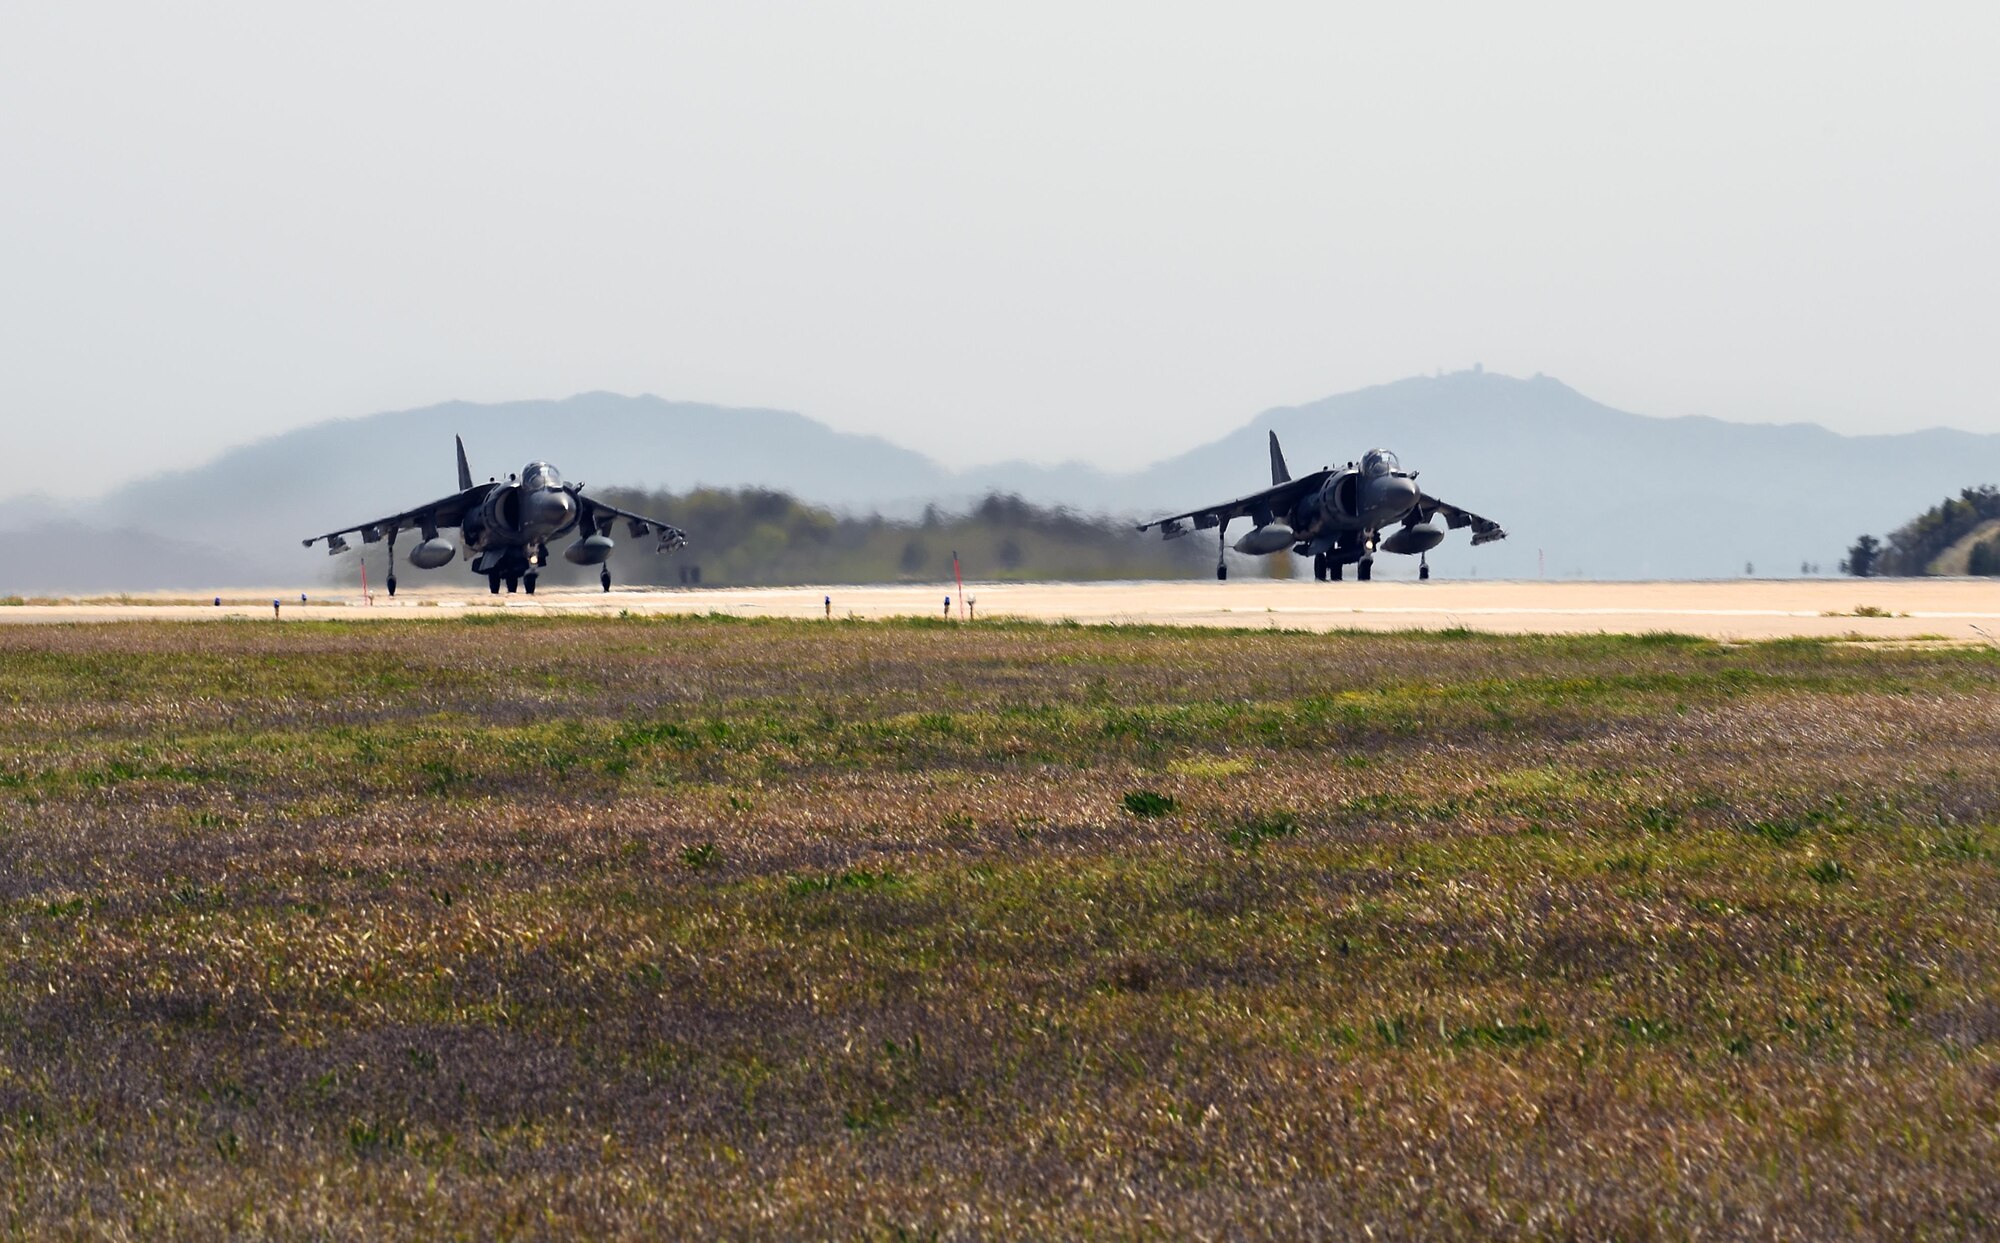 U.S. Marine Corp AV-8B Harriers with Marine Attack Squadron (VMA) 311 prepare for takeoff during Exercise MAX THUNDER 17 at Kunsan Air Base, Republic of Korea, April 27, 2017. In Max Thunder, U.S. and ROK air forces consistently train together to be ready around-the-clock to defend the Republic of Korea. The interoperability and trust developed between the allies in training is critical to ensure we are prepared for any challenge. (U.S. Air Force photo by Tech. Sgt. Jeff Andrejcik/Released)